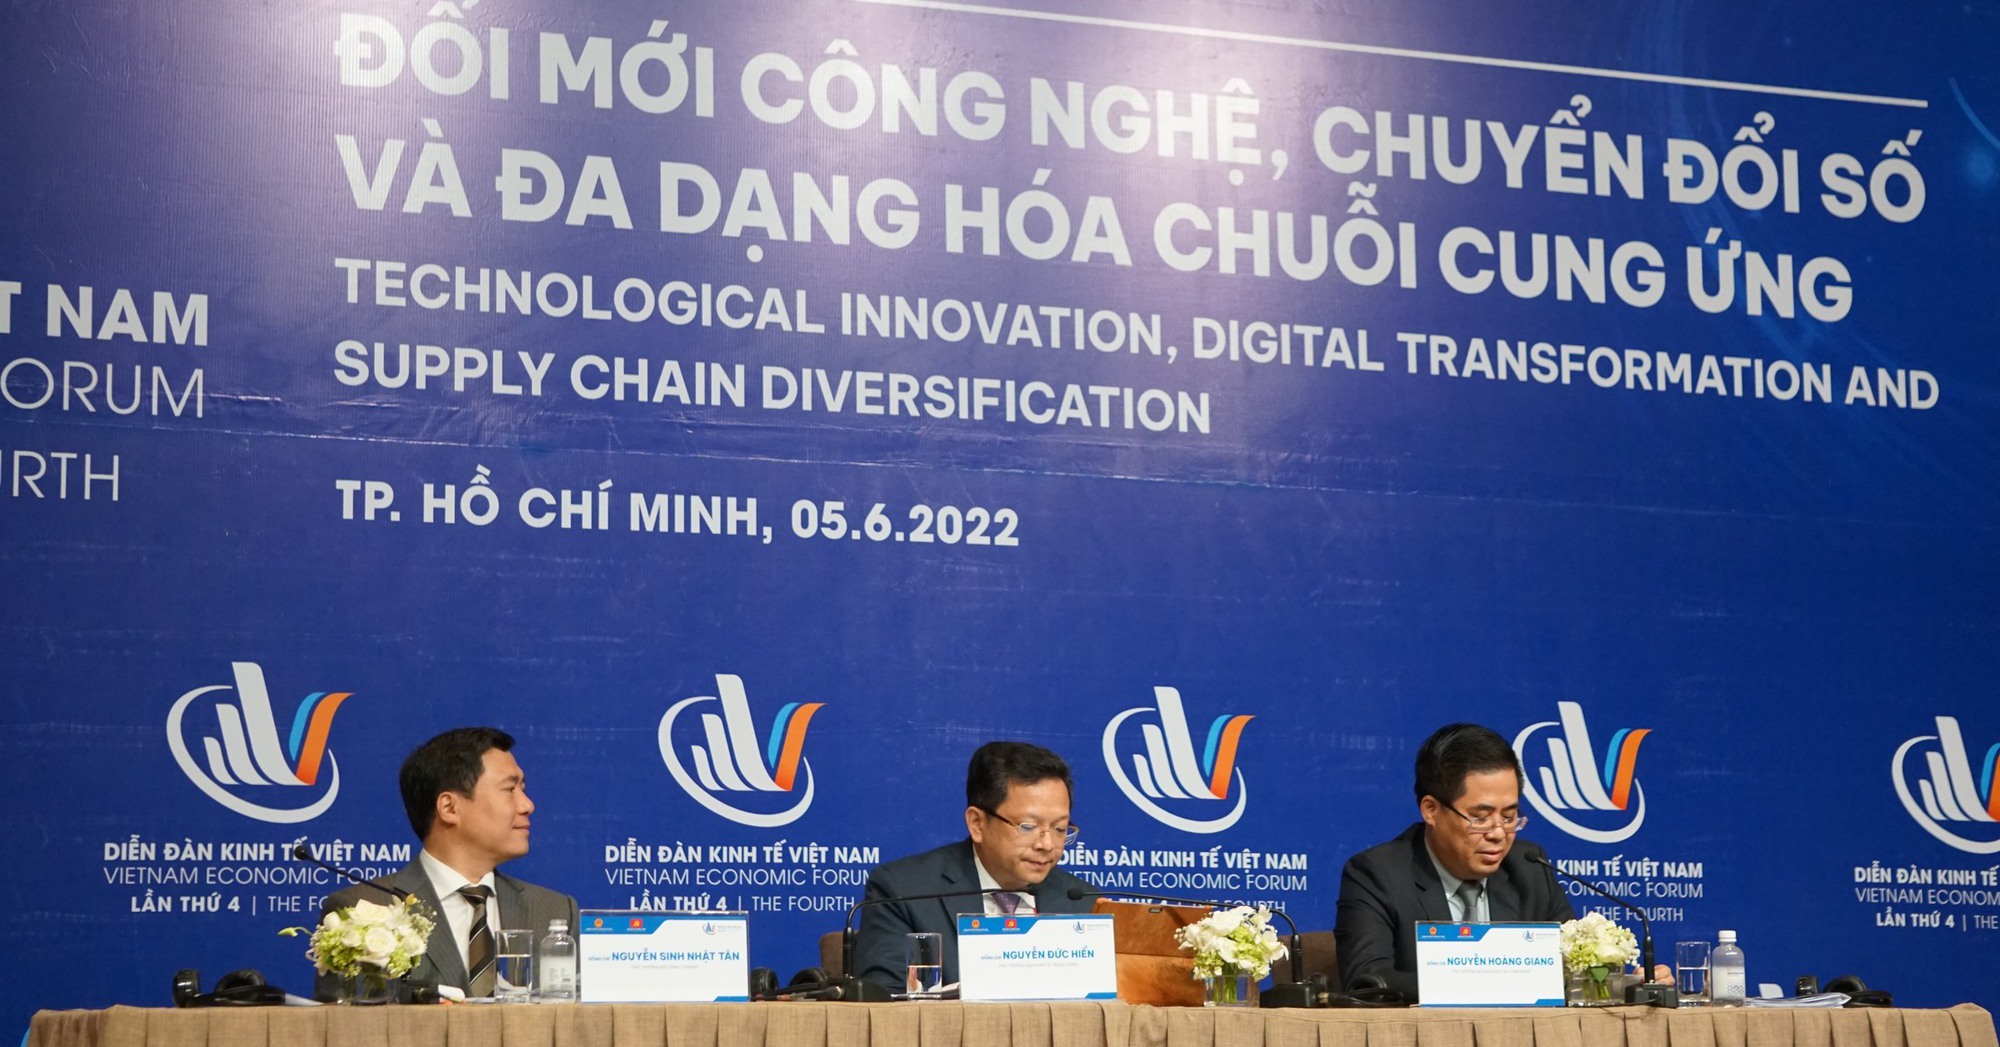 Vietnam is not necessarily behind in technological innovation and digital transformation